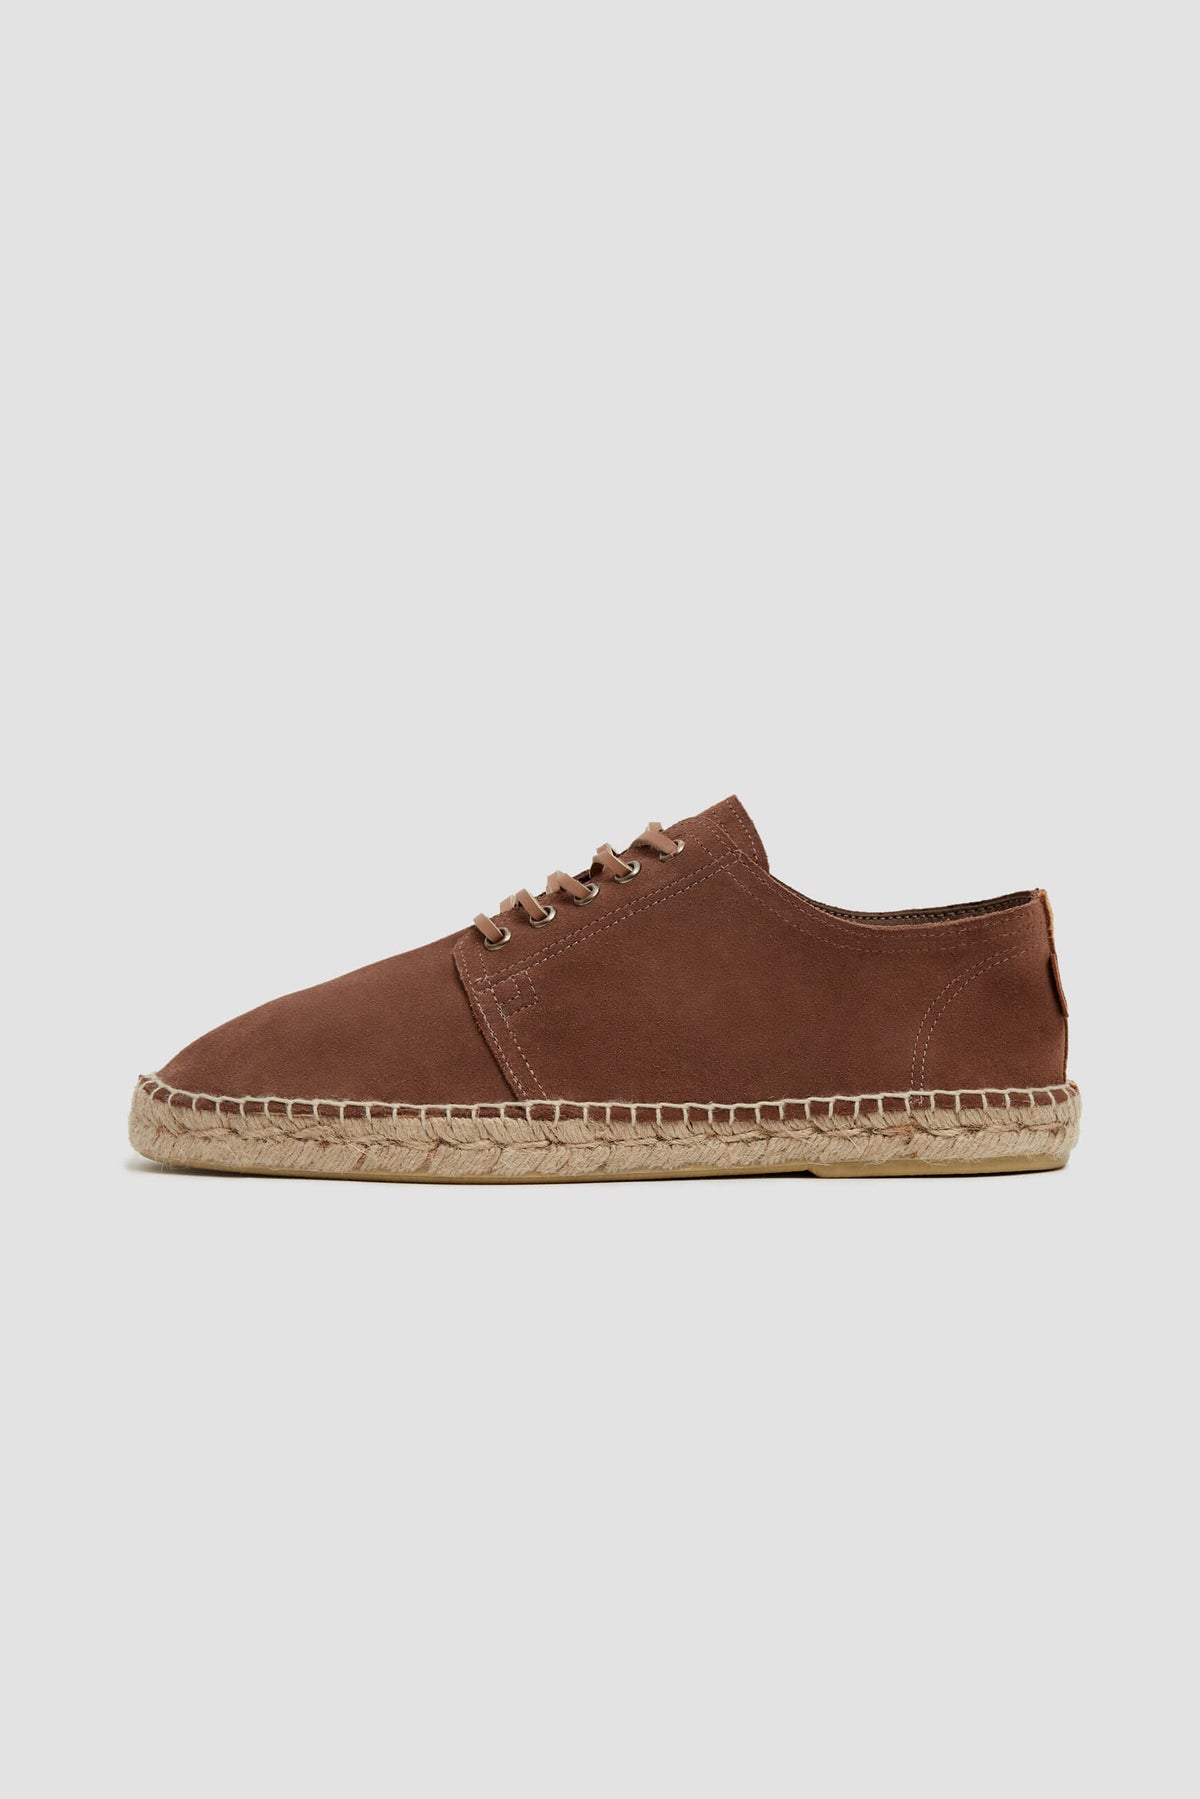 HIGBY JUTE SUEDE WILLOW